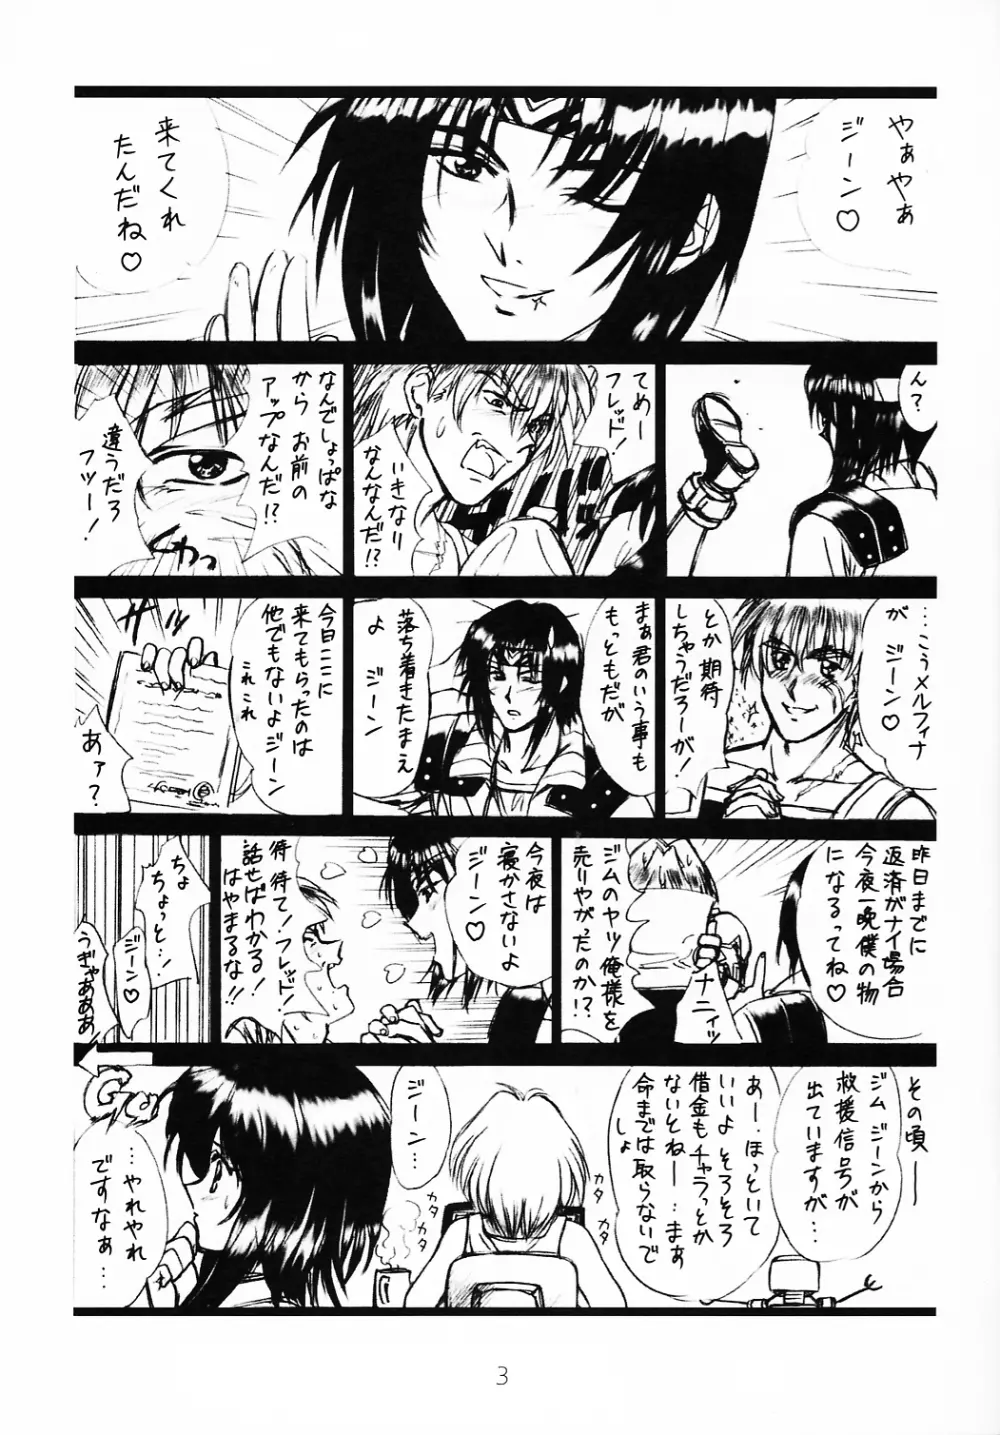 voguish I OUTLAW STAR Page.2